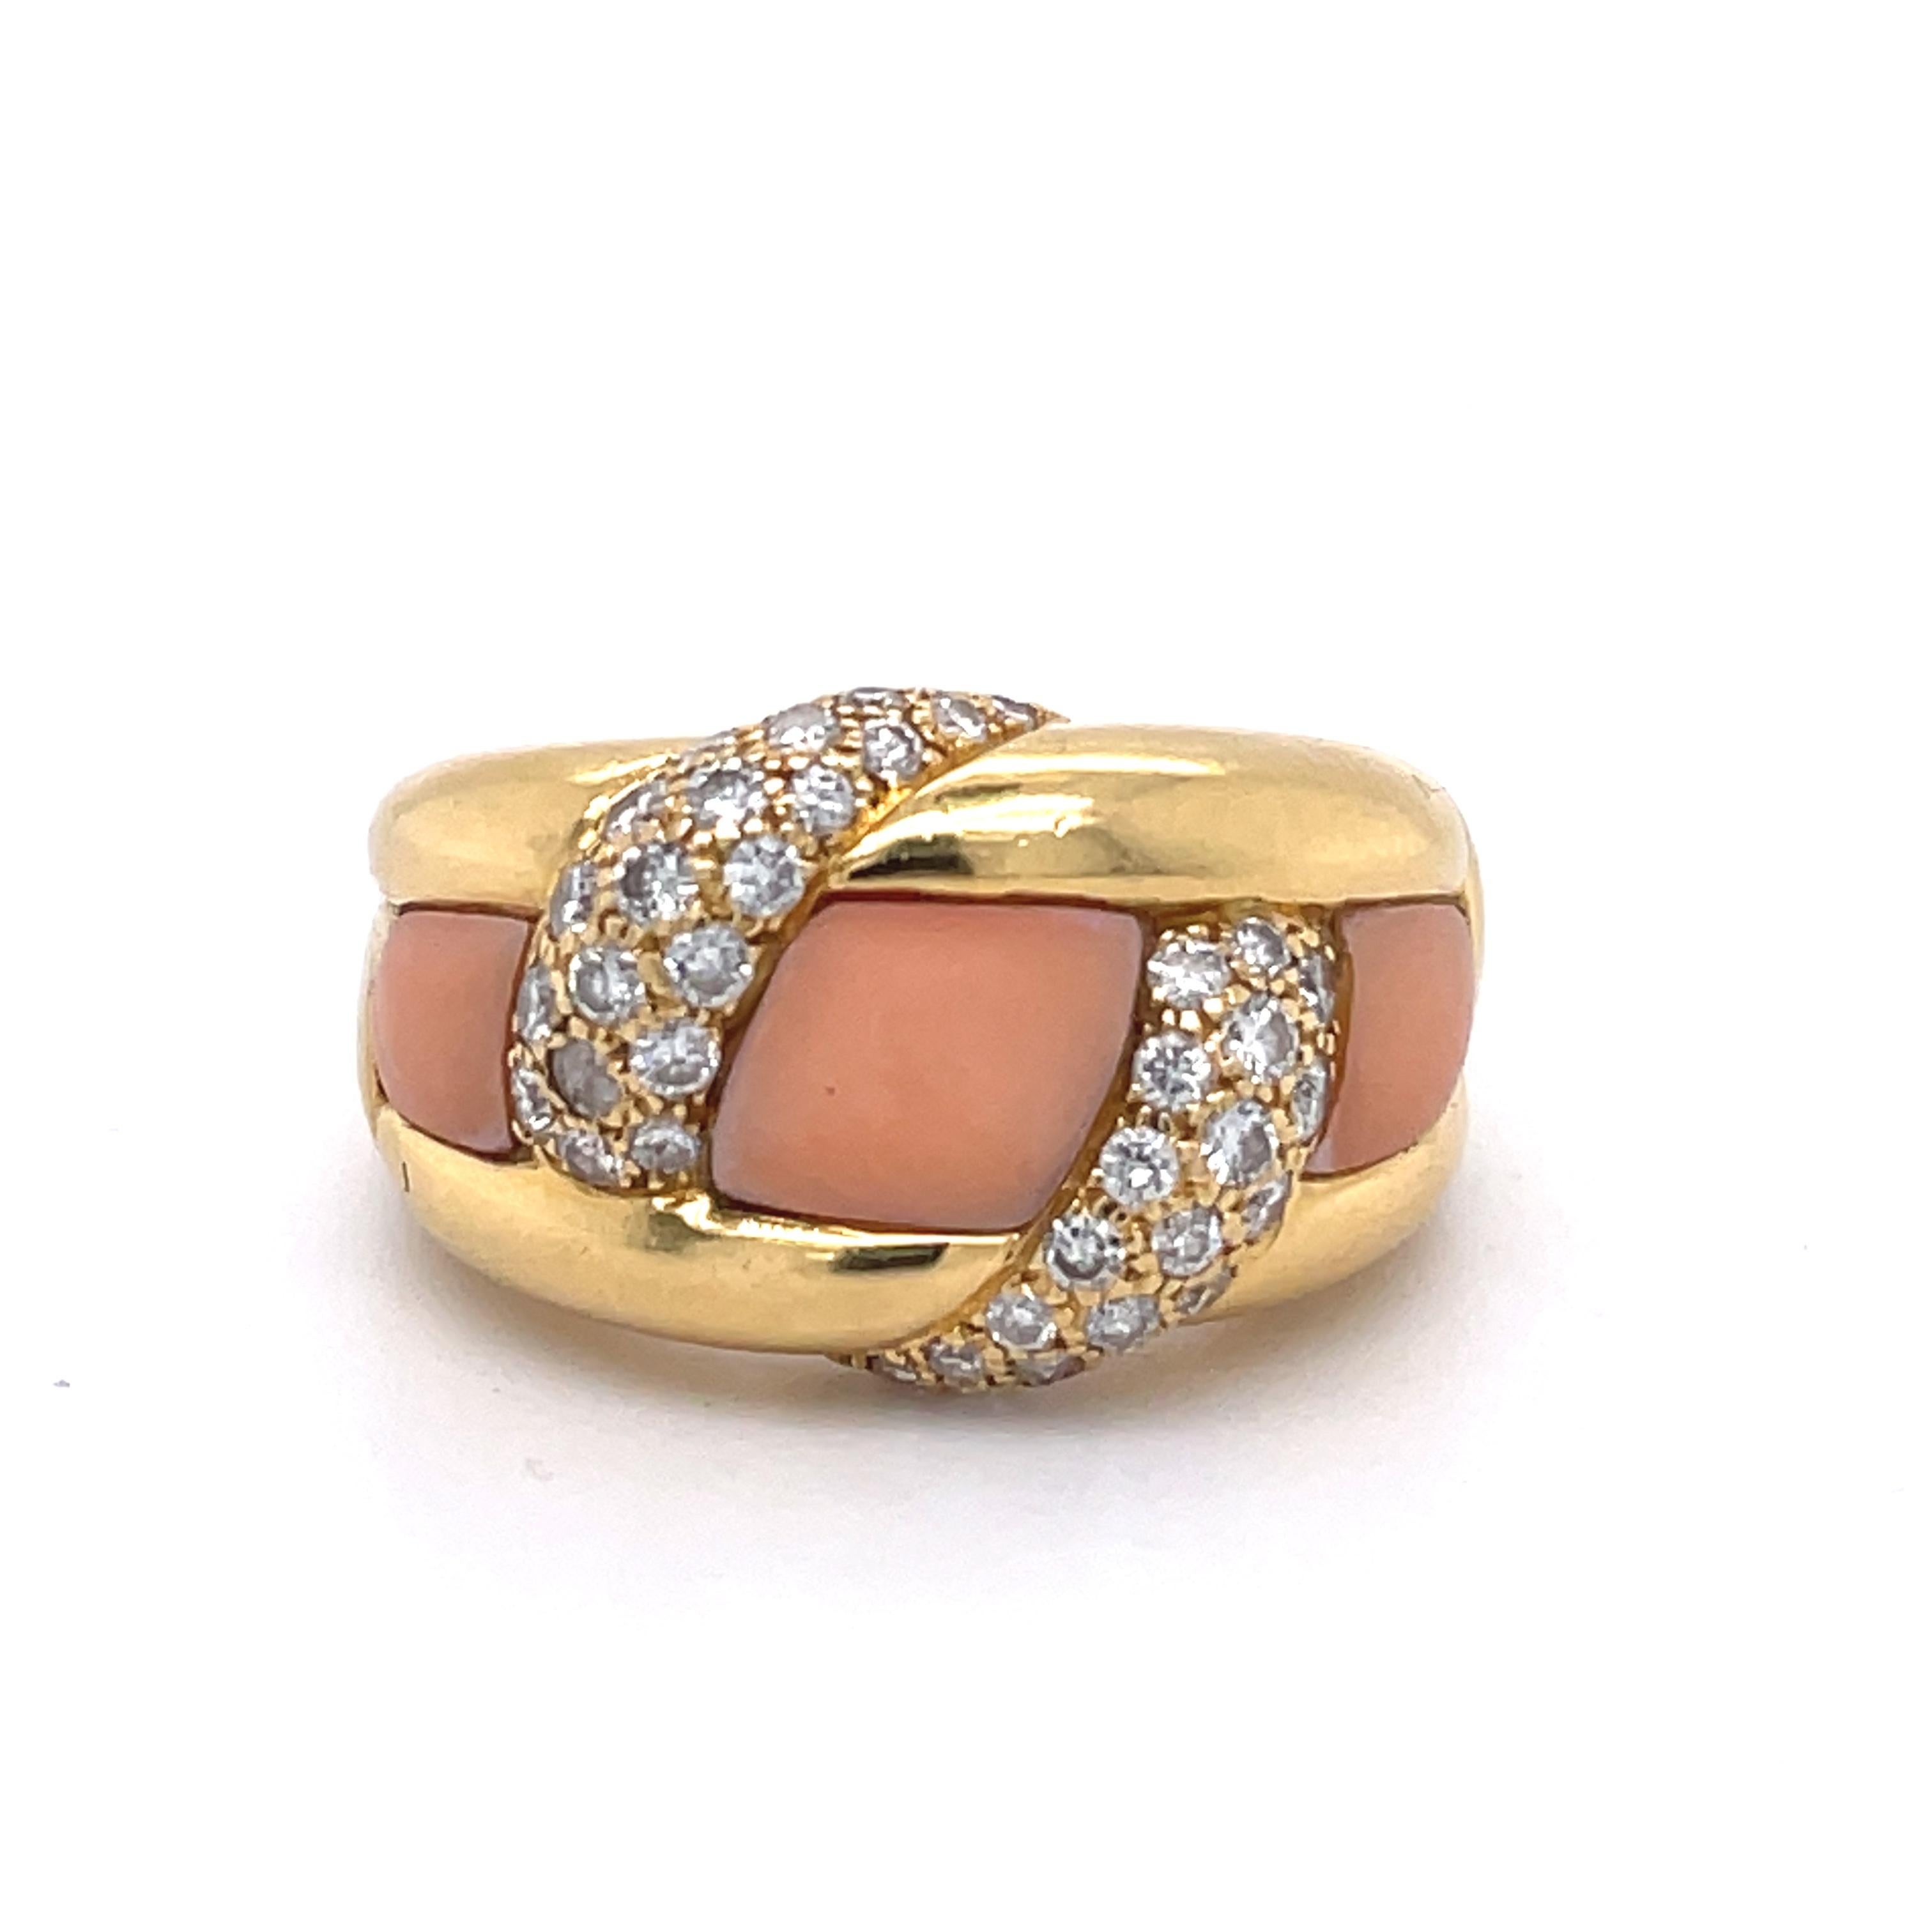 Vintage Pink Coral Ring - 18K yellow gold, 0.5CT Diamonds, Cocktail ring For Sale 4